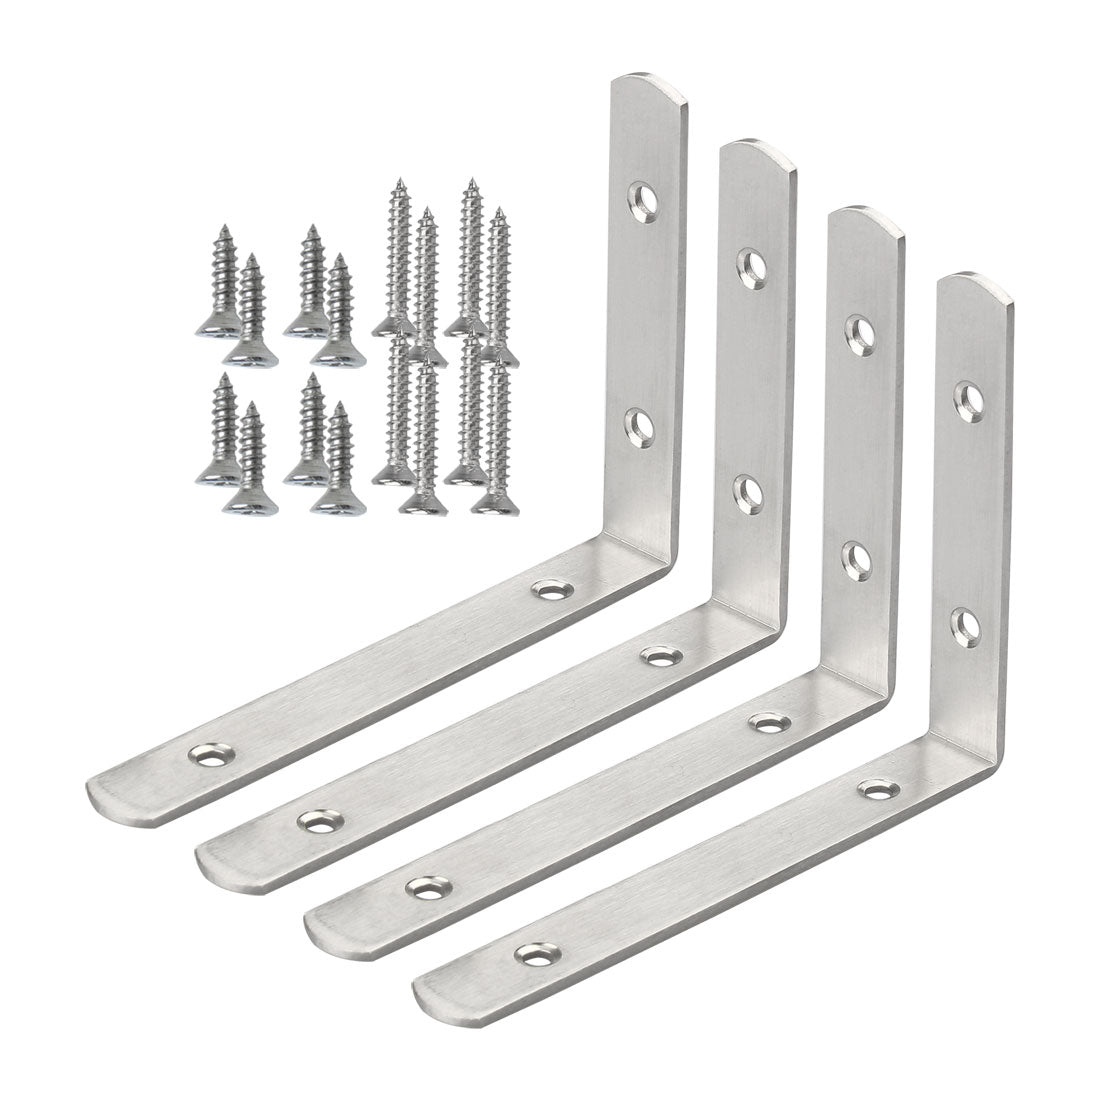 uxcell Uxcell Angle Bracket Stainless Steel Brace Fastener Support w Screws 150 x 110mm, 4pcs